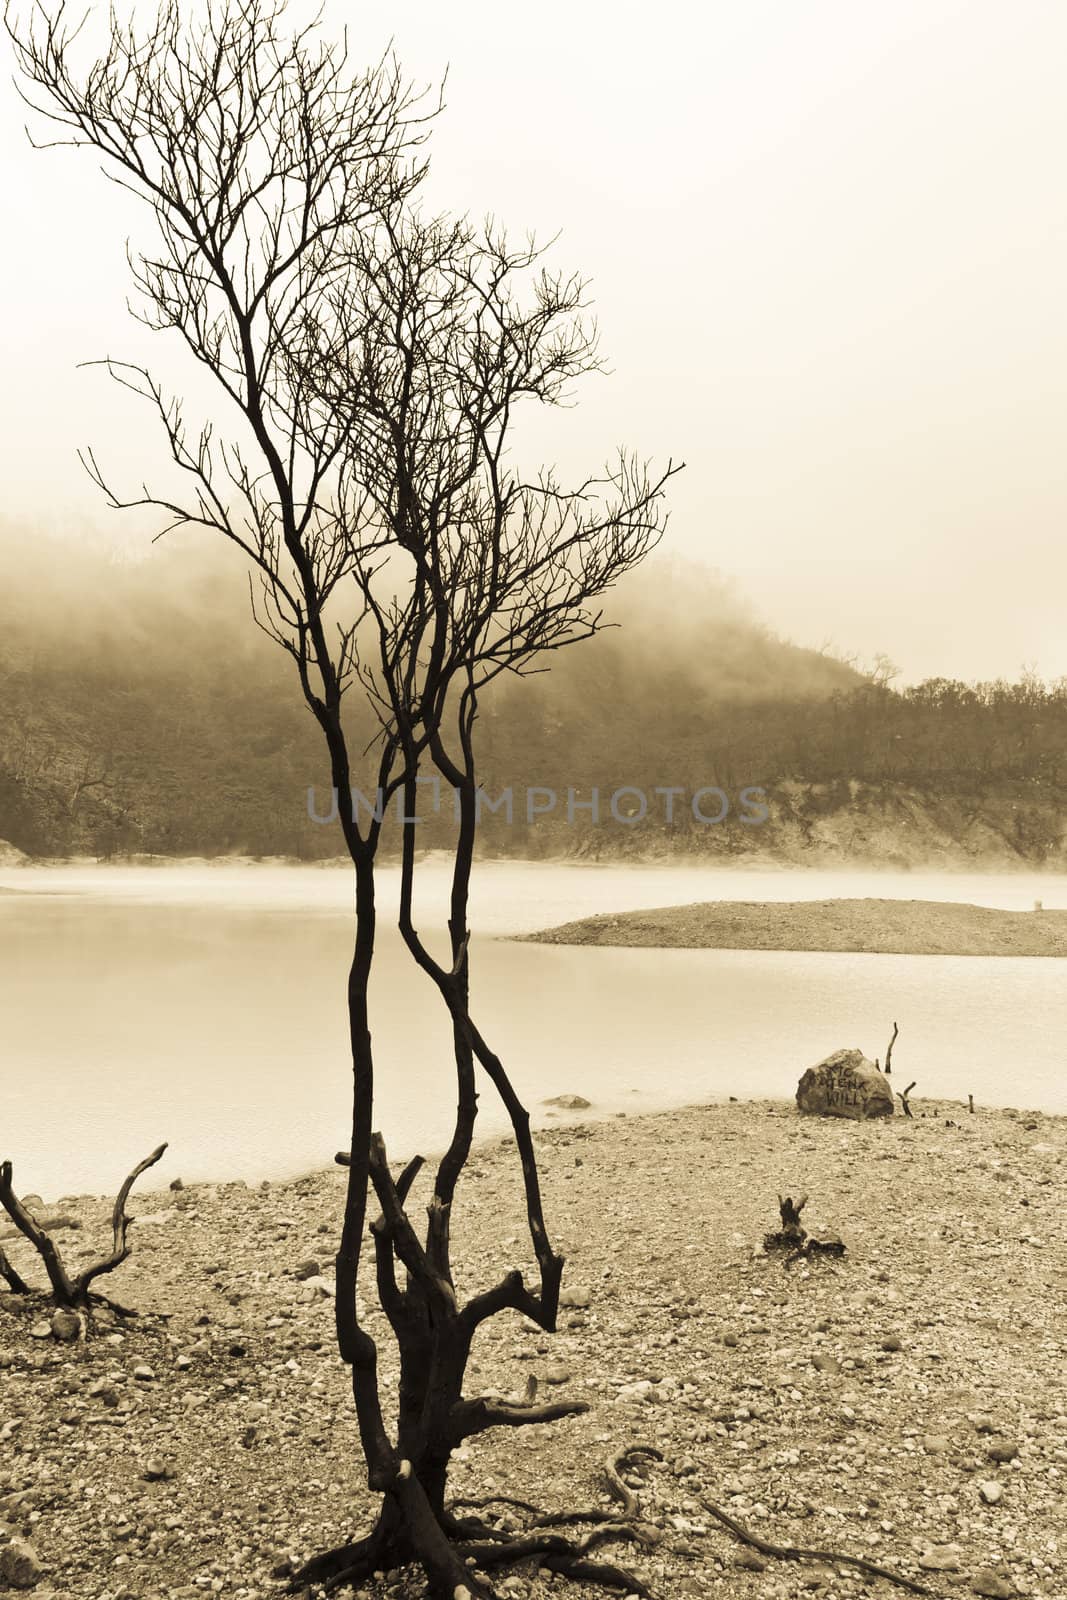 dead tree atthe edge of volcaniccrater lake of Kawah Putih, Bandung Indonesia splitted toned